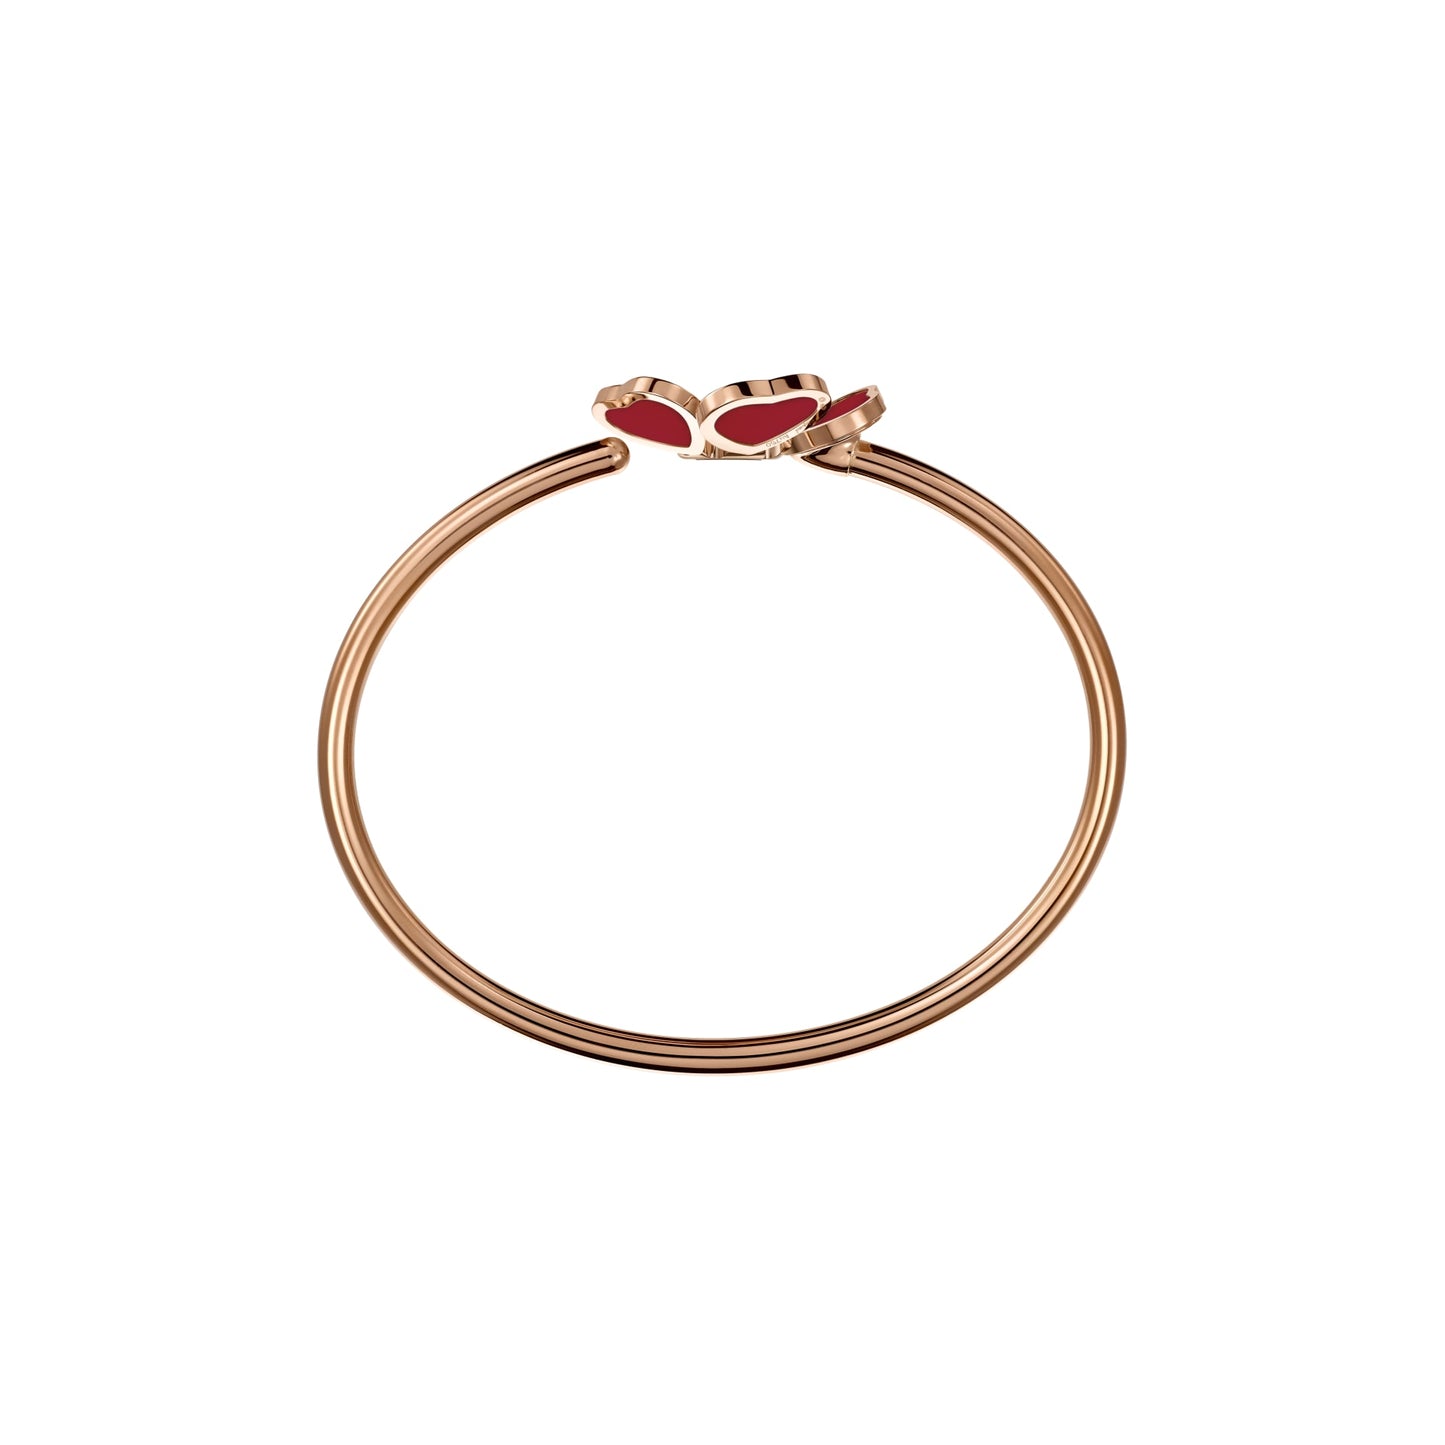 HAPPY HEARTS FLOWERS BANGLE, ETHICAL ROSE GOLD, DIAMOND, RED STONE 85A085-5800